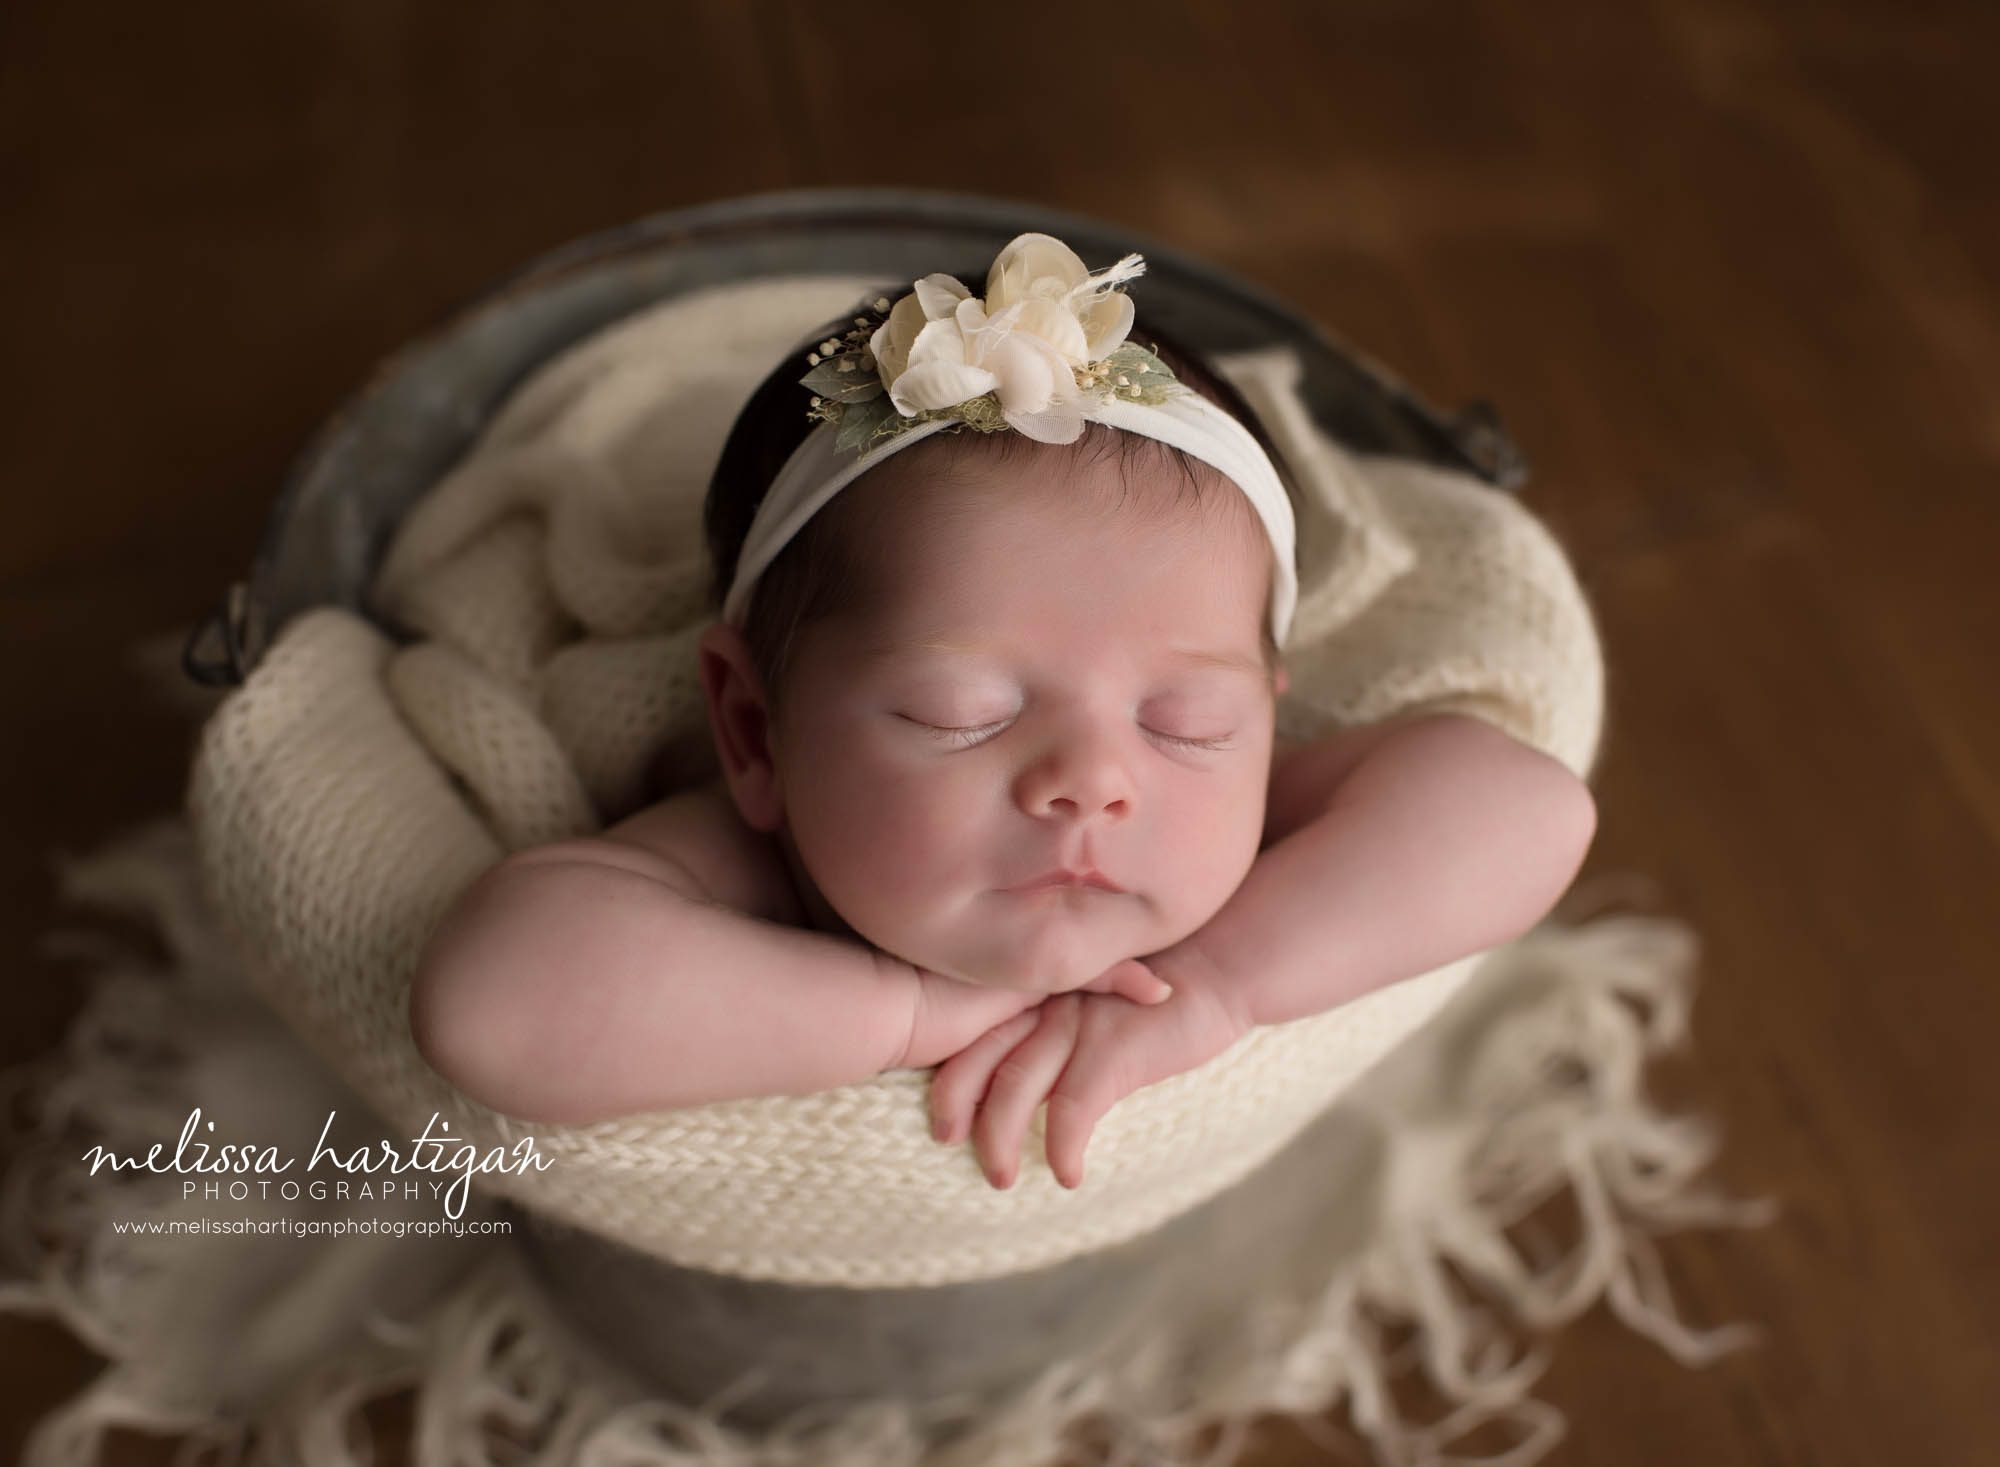 newborn baby girl posed in bucket with neutral beige knitted wrap wearing floral headband CT newborn photography